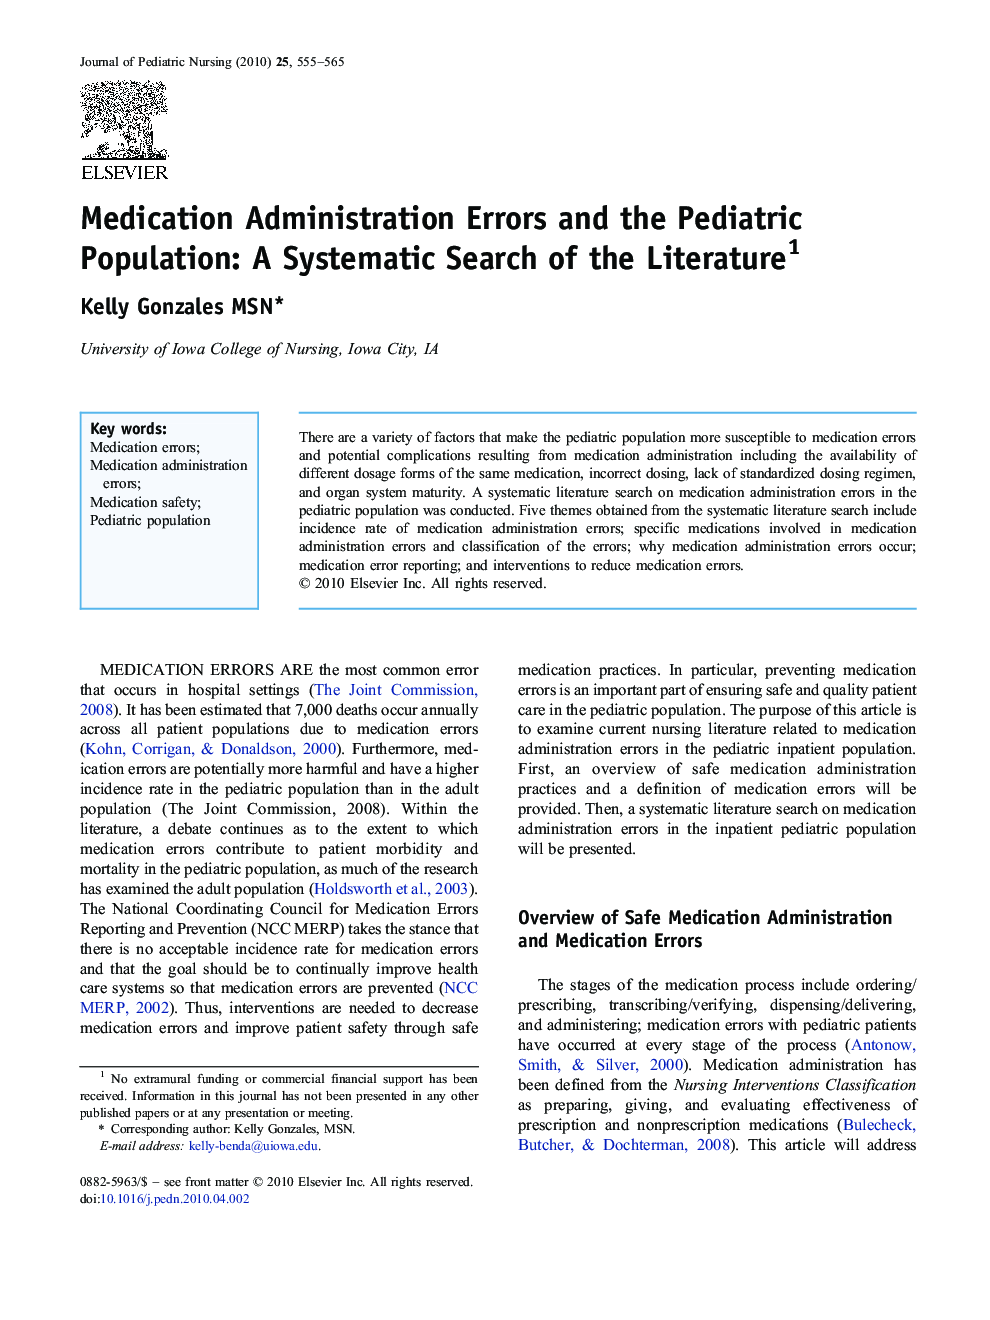 Medication Administration Errors and the Pediatric Population: A Systematic Search of the Literature 1